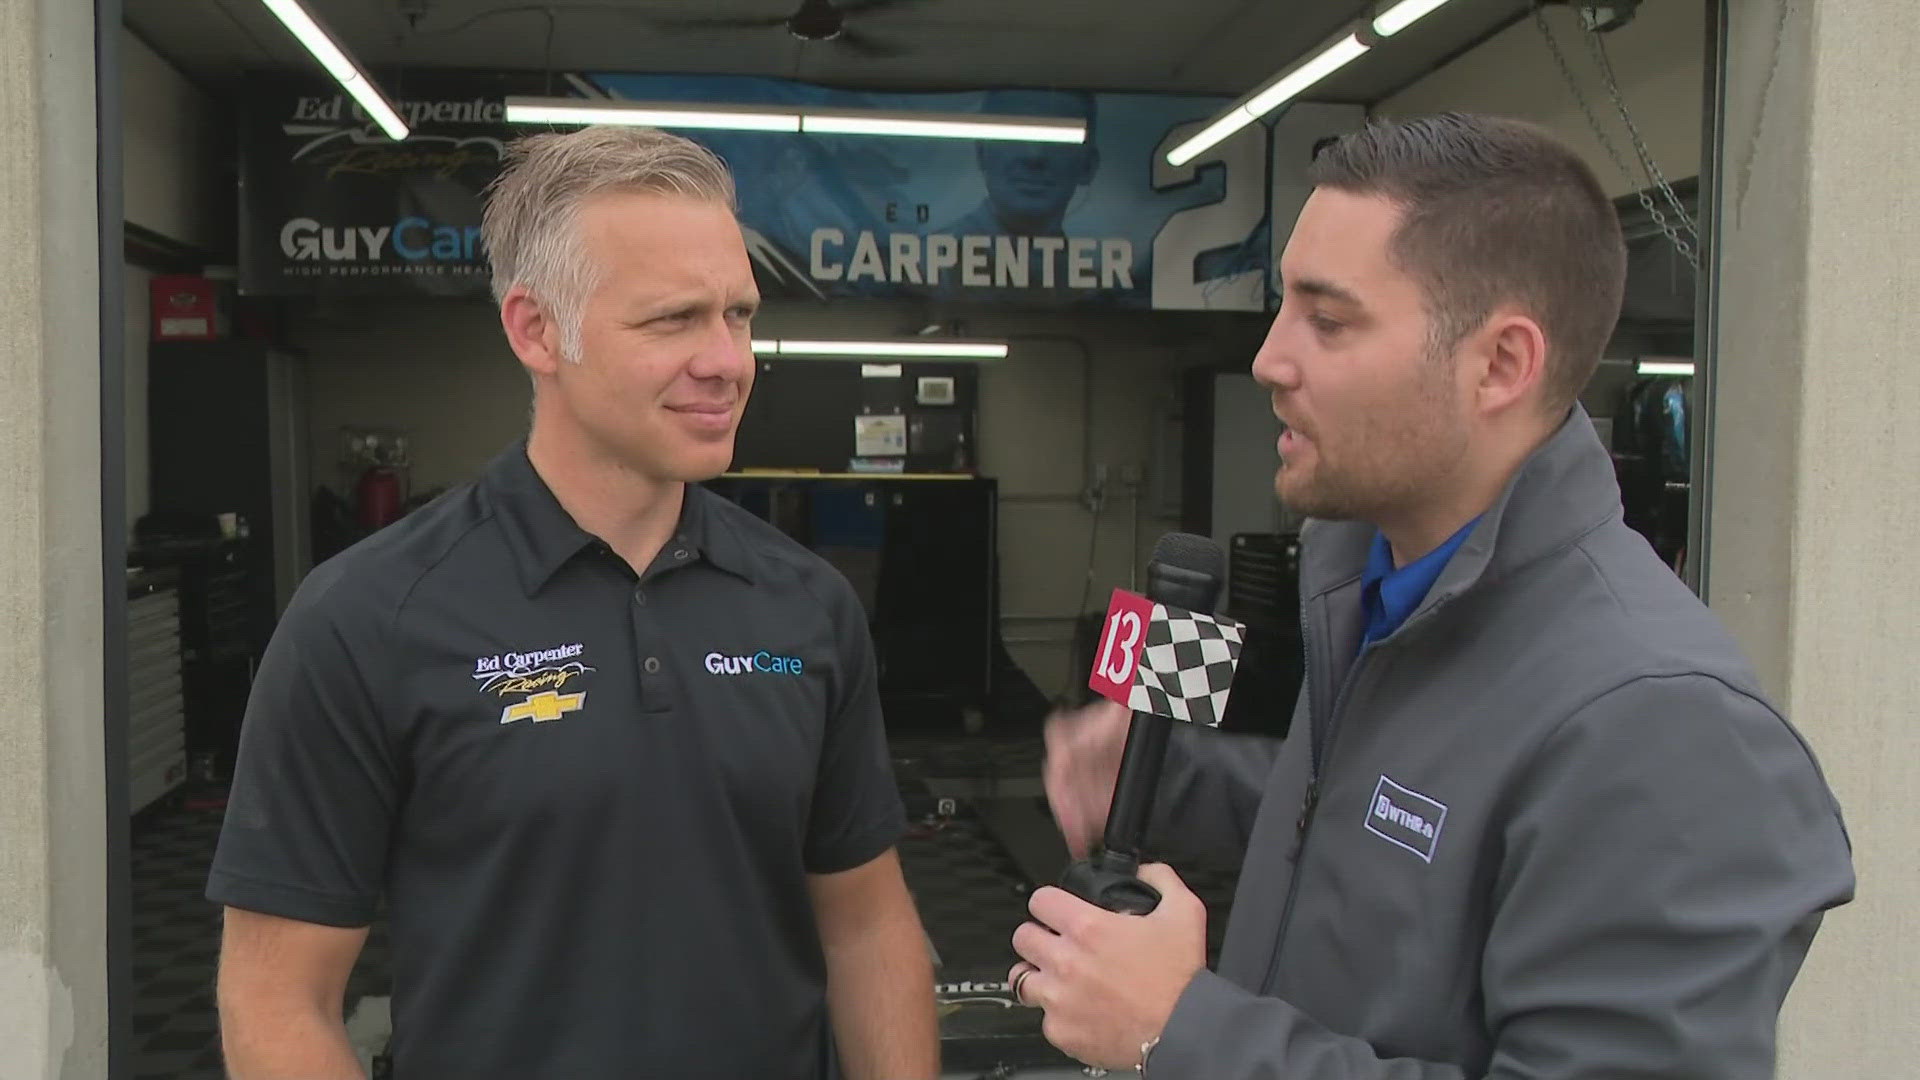 Ed Carpenter will start 17th at this year's Indy 500. Carpenter has two top 5 finishes at the Indy 500 in his 20 races at the historic oval track.